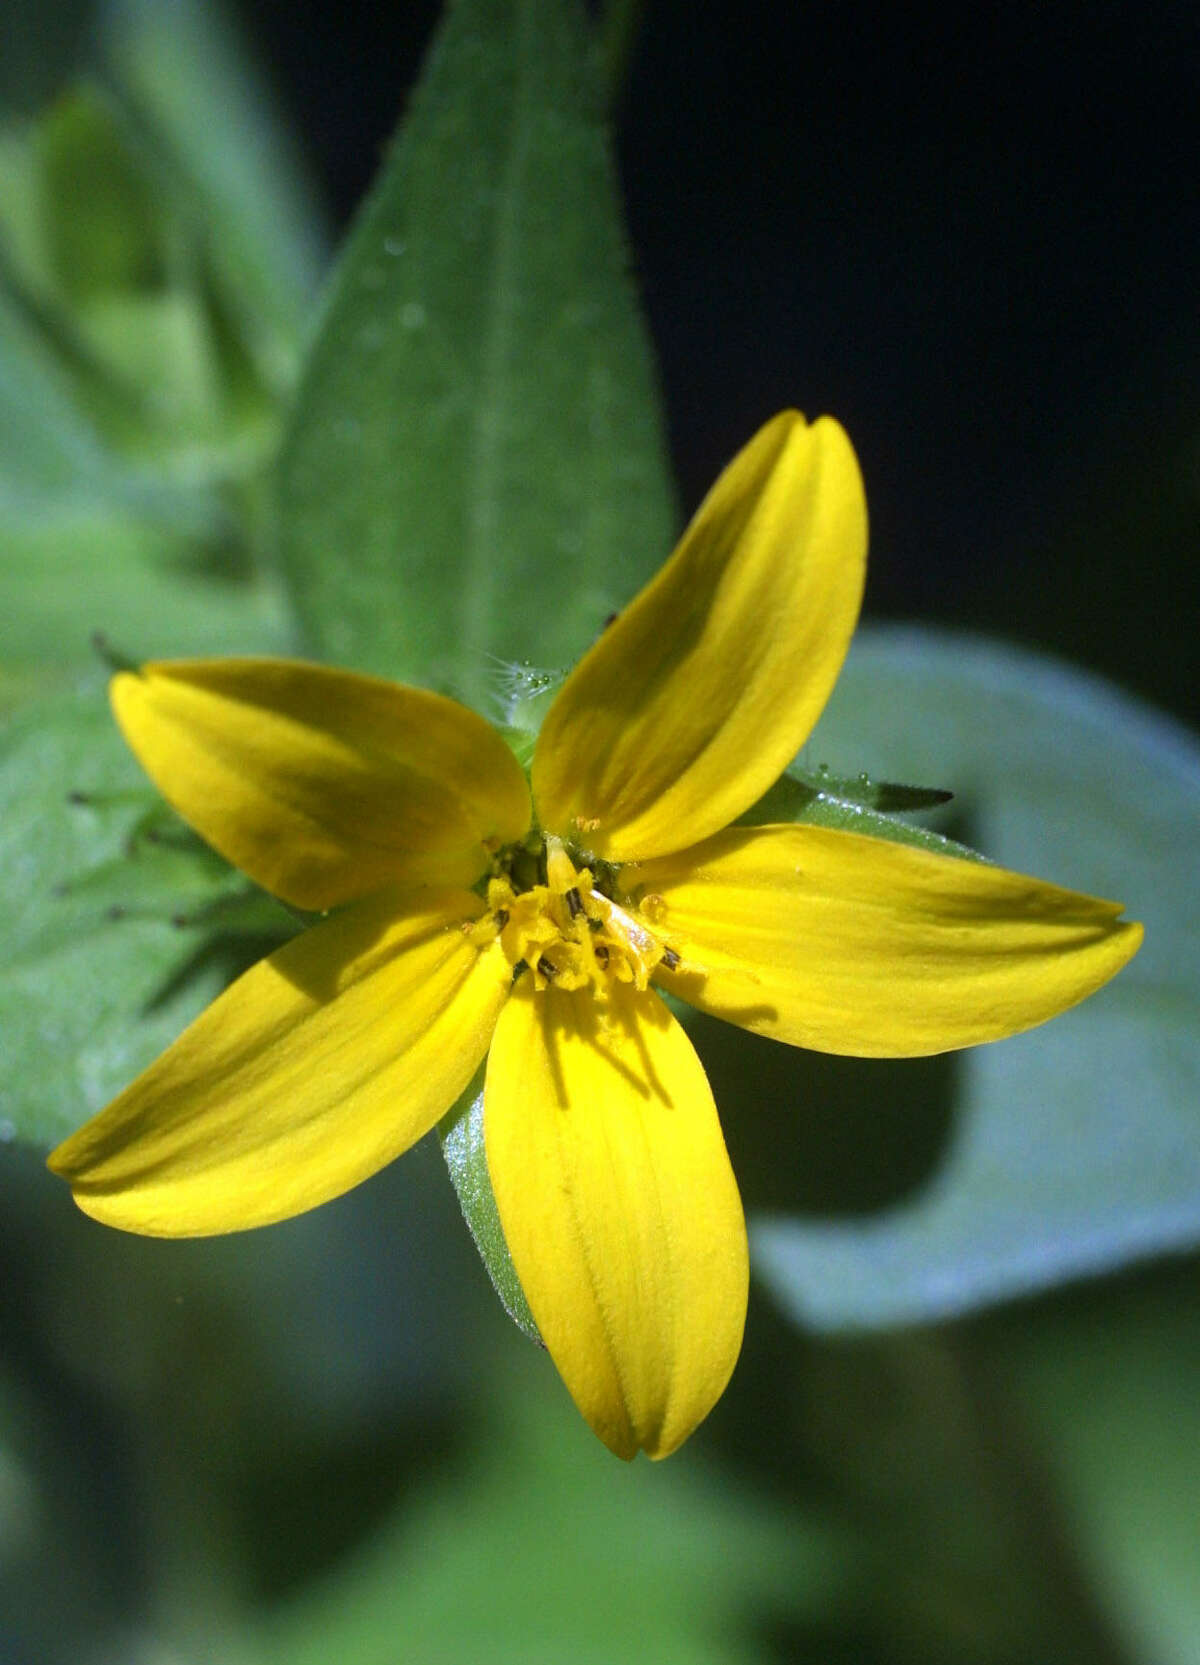 Texas yellow star has five ray flowers (petals) with notched tips.